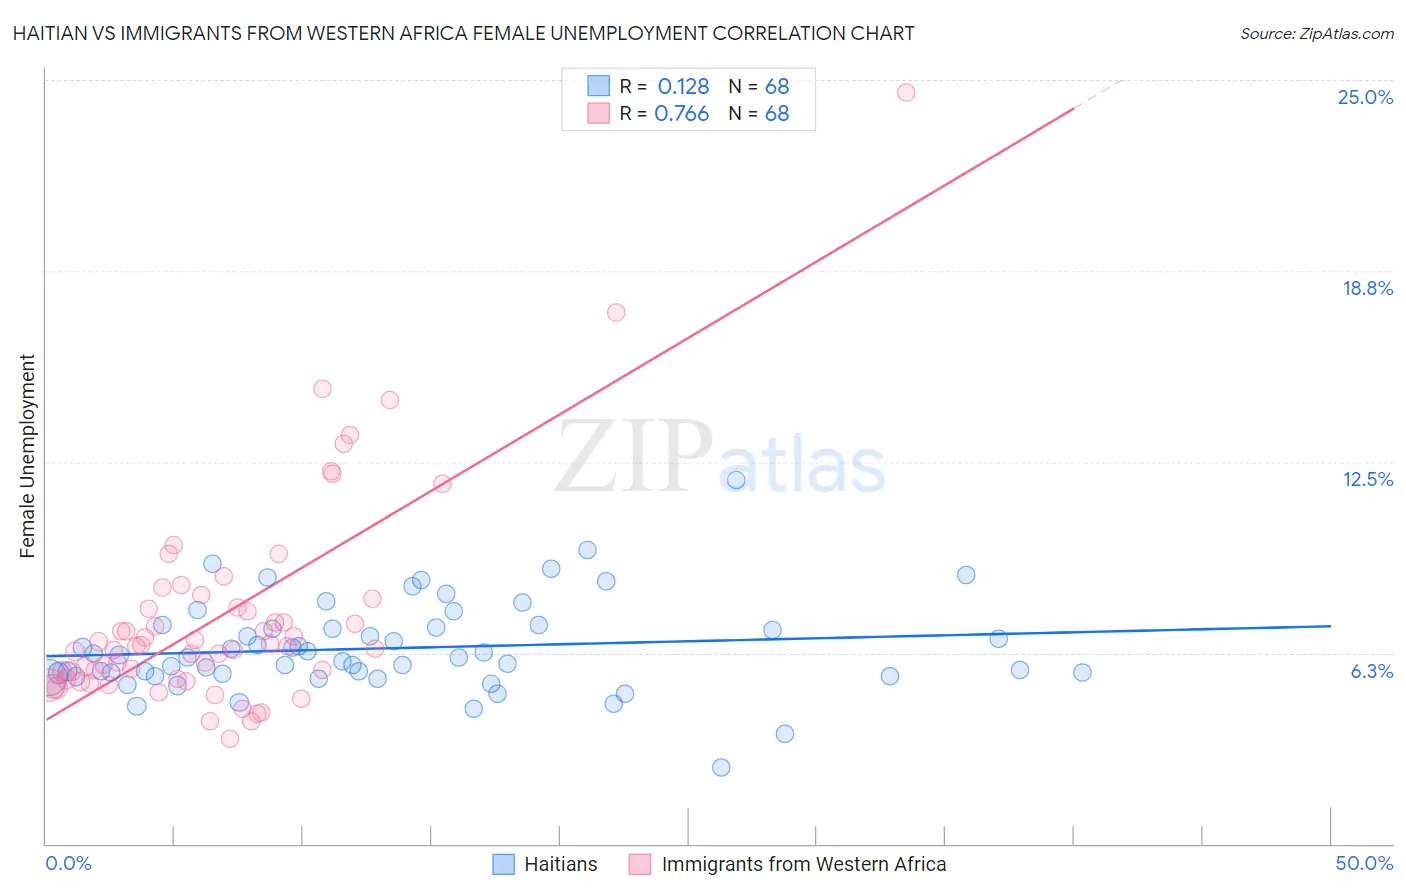 Haitian vs Immigrants from Western Africa Female Unemployment